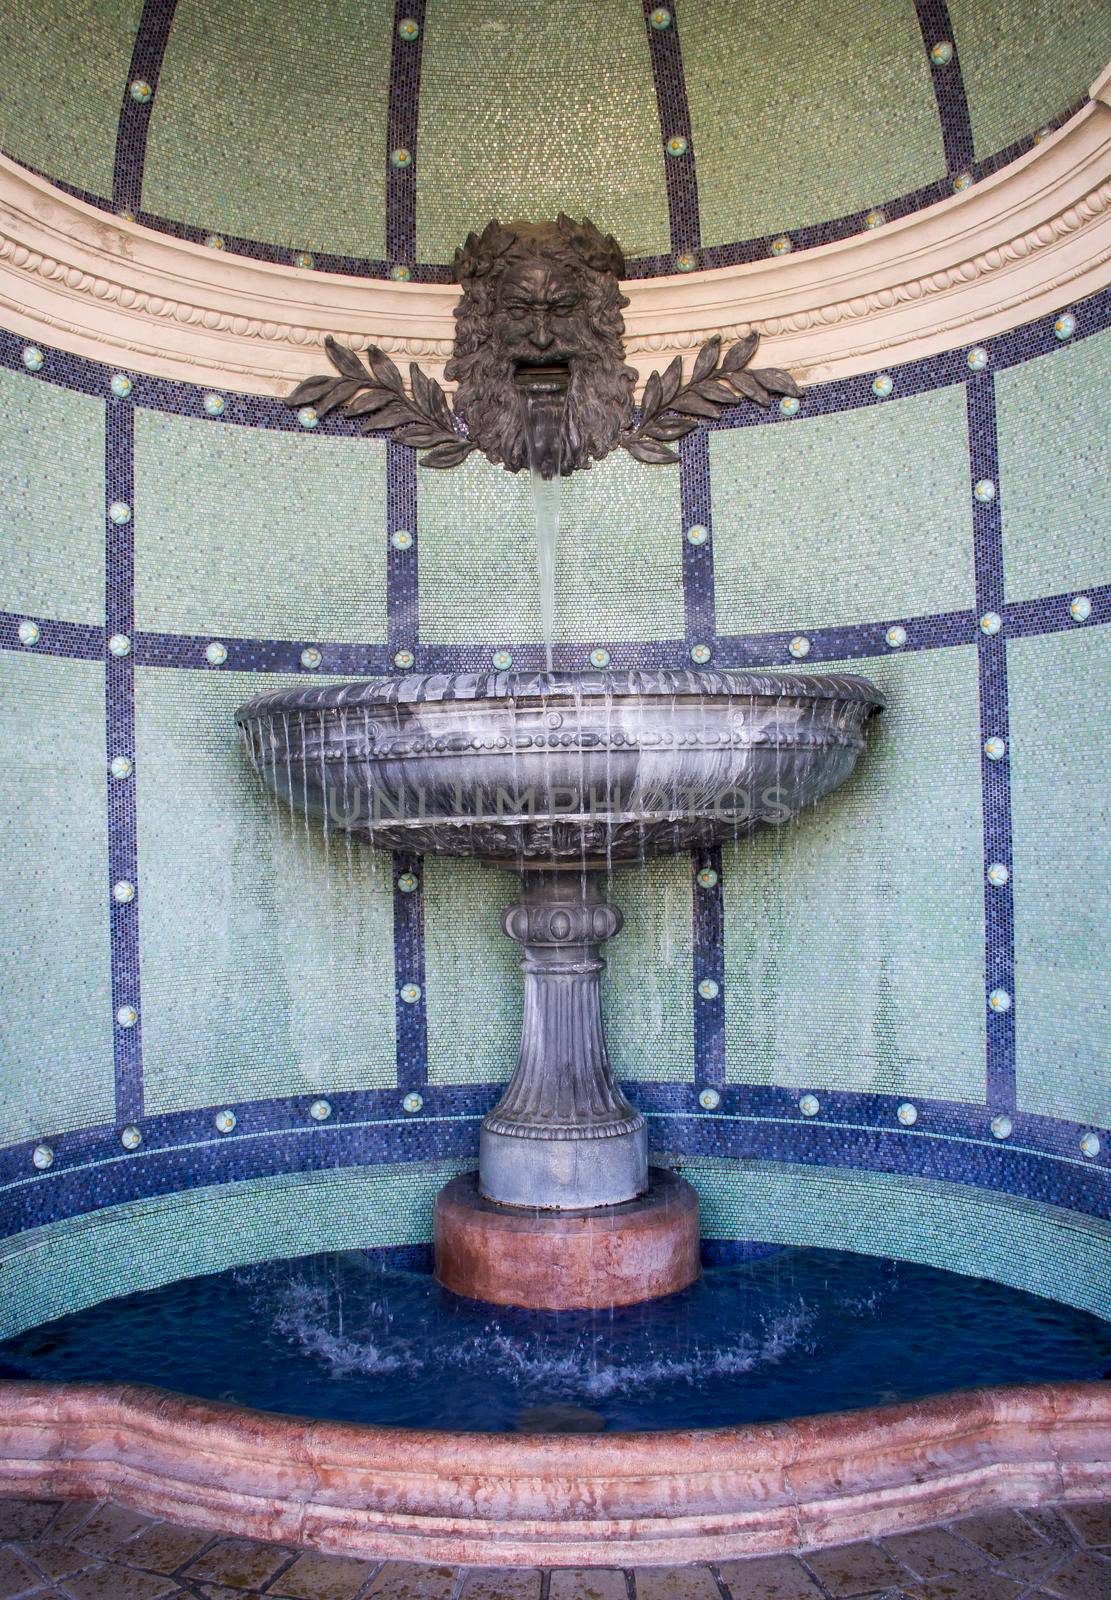 Fountain in the building of The Castle Garden Bazaar. Budapest. Hungary. High quality background photo